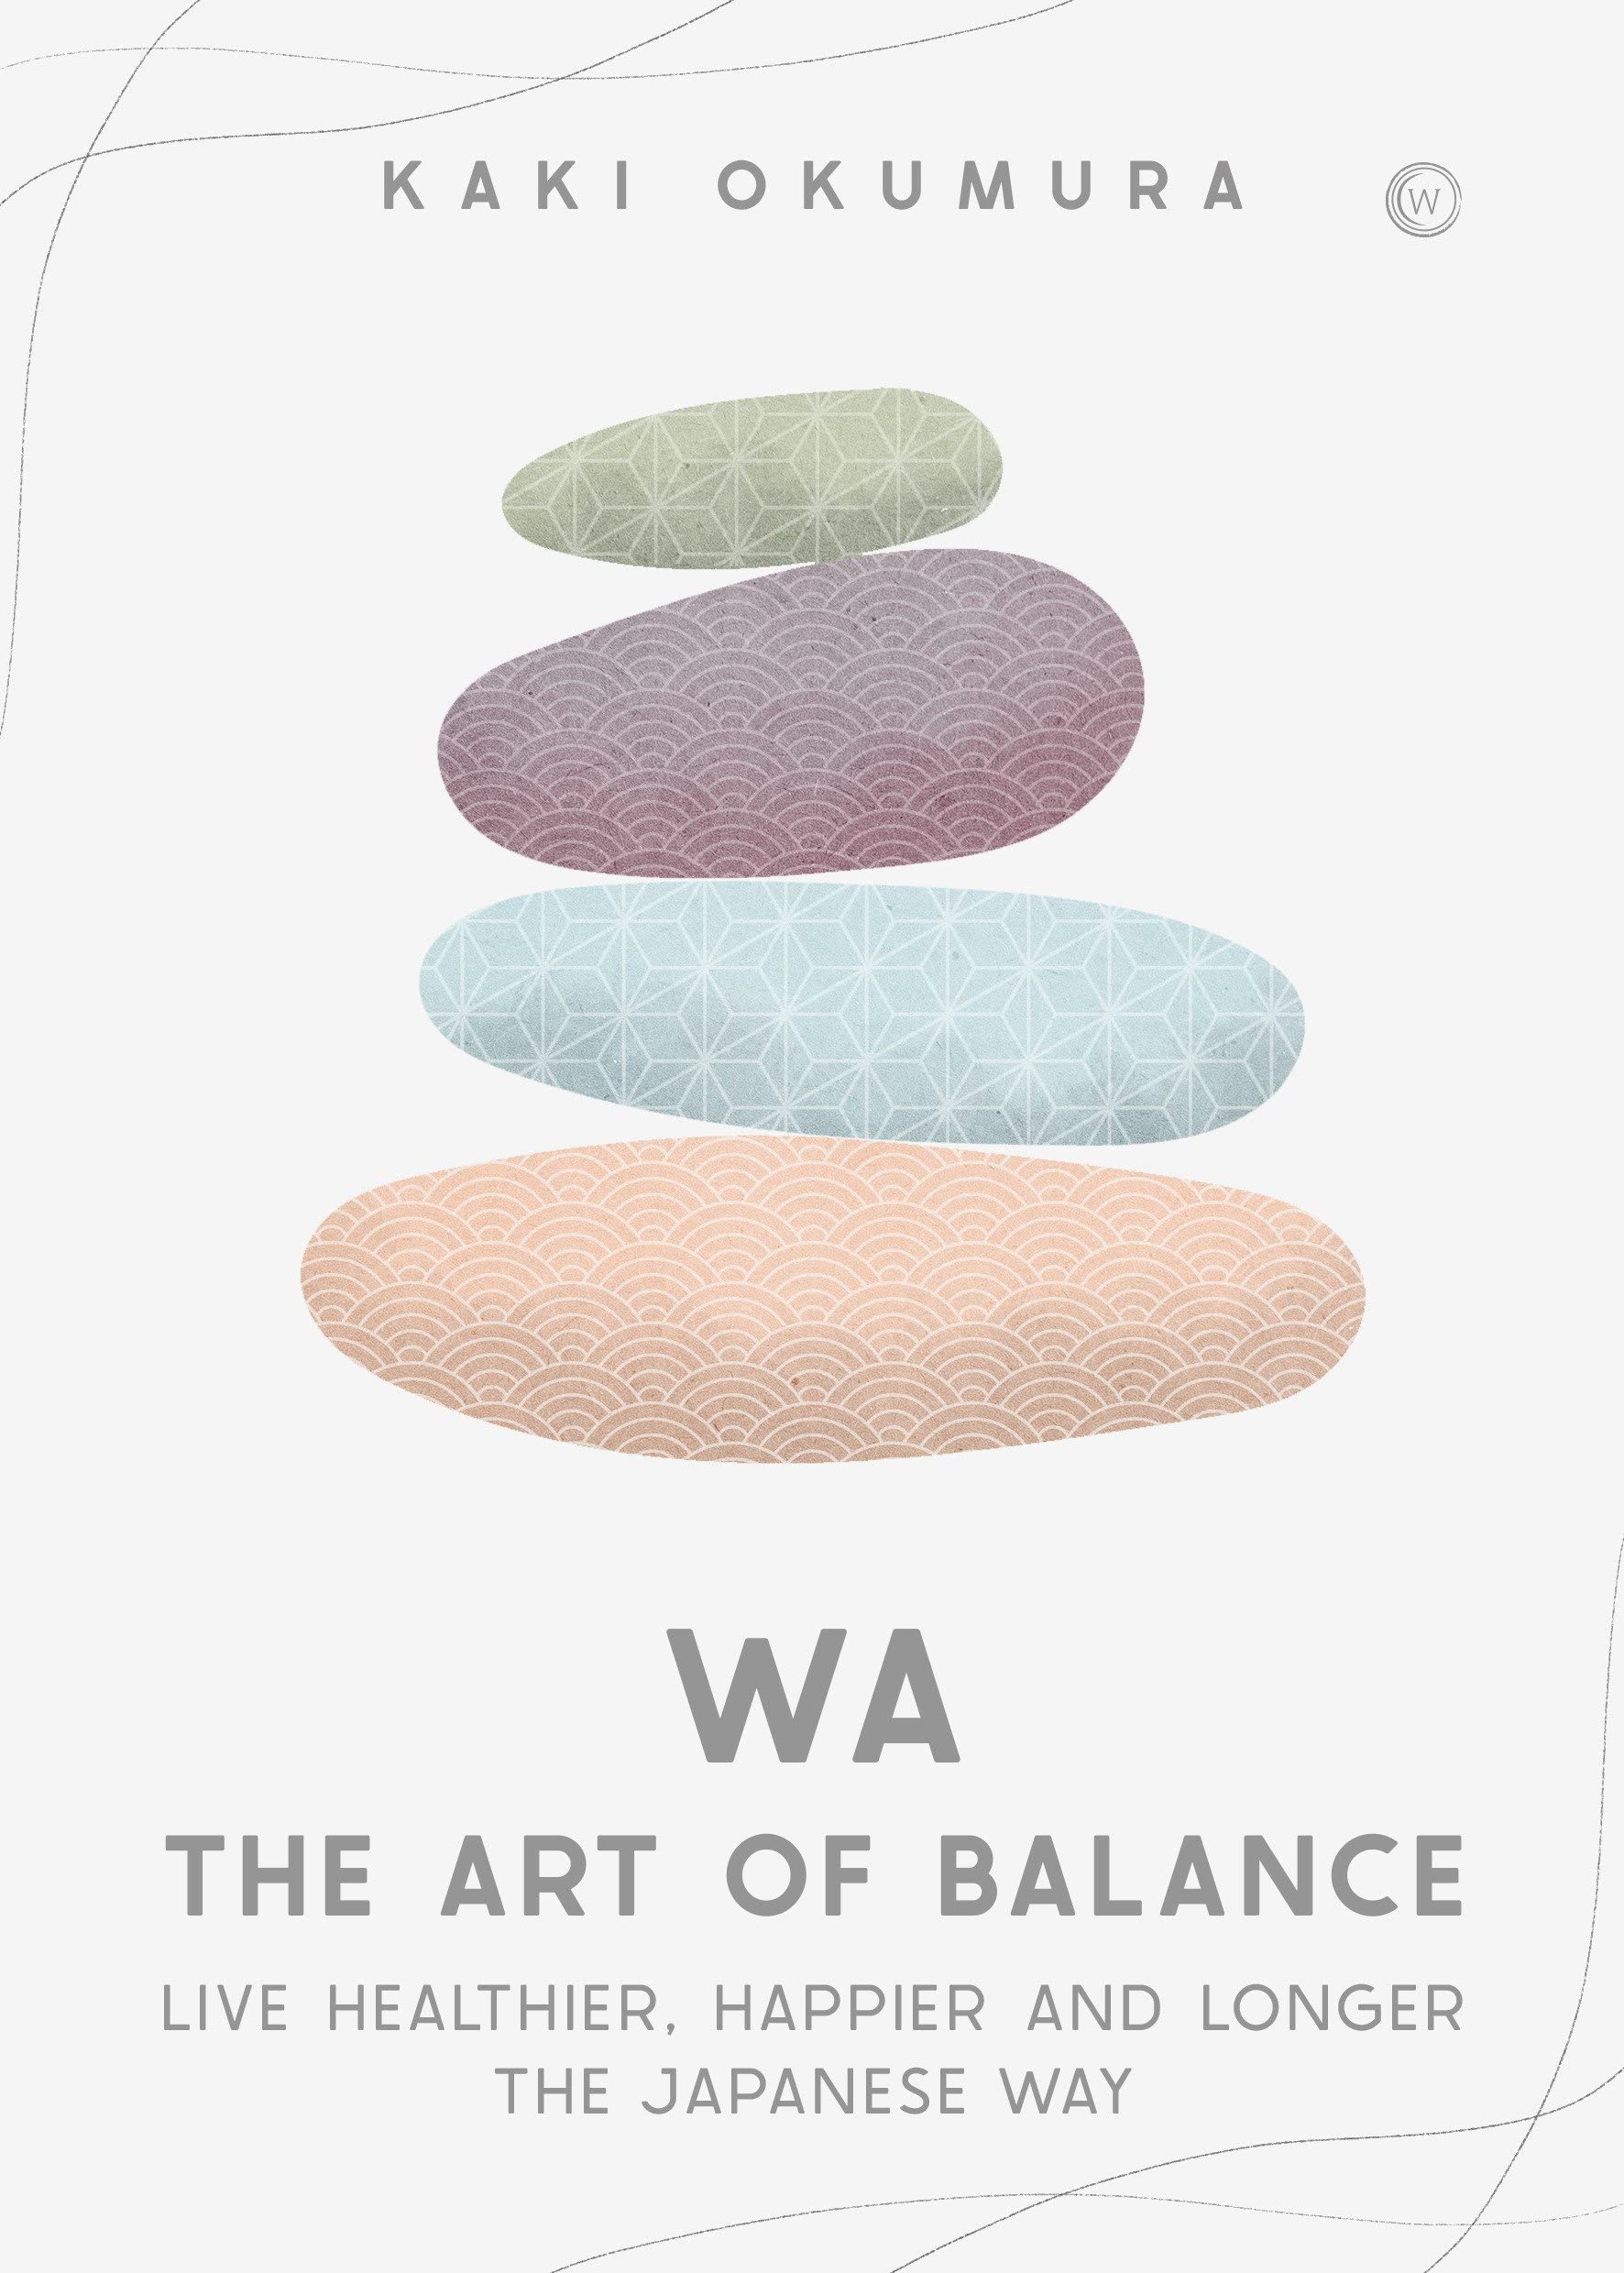 Wa – The Art of Balance: Live Healthier, Happier and Longer the Japanese Way